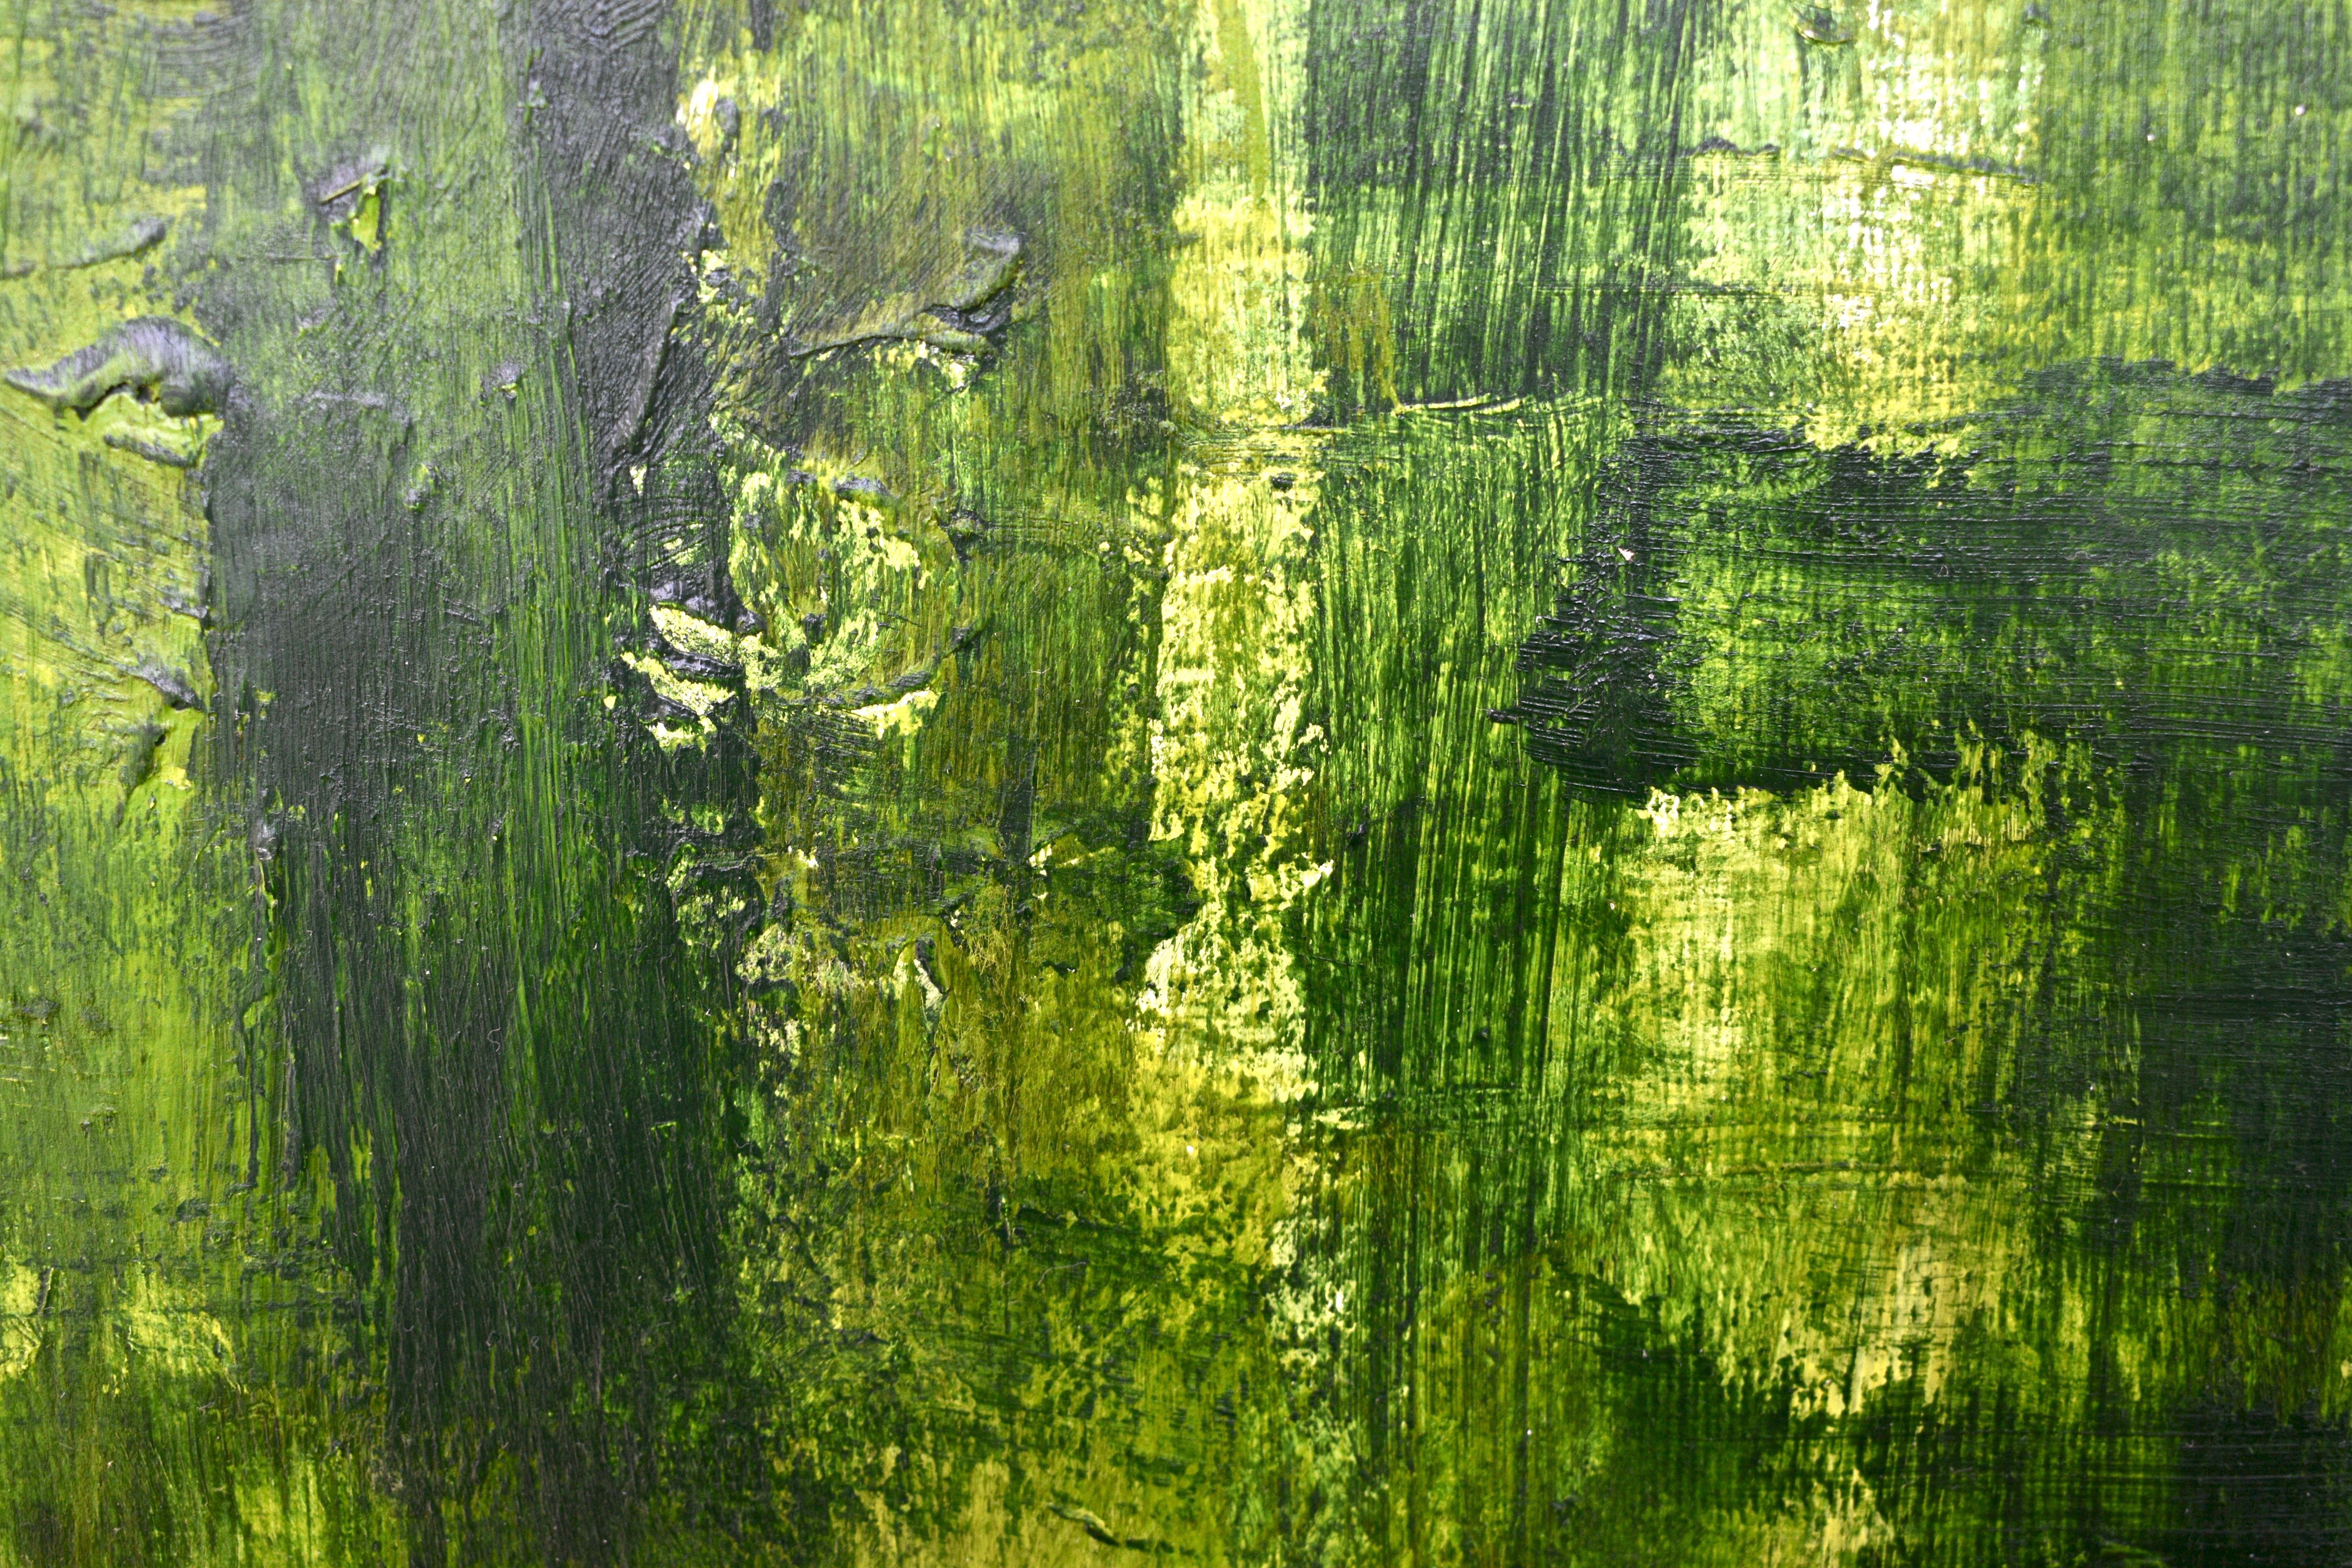 Probably inspired by Gerhard Richter having seen his 'cage' paintings at Tate Modern, London, 'Greenwood' is an Abstract painting made in March 2013 reminding us of the greenwood (forest) and it's cool, shady greenness. And with that maybe also an